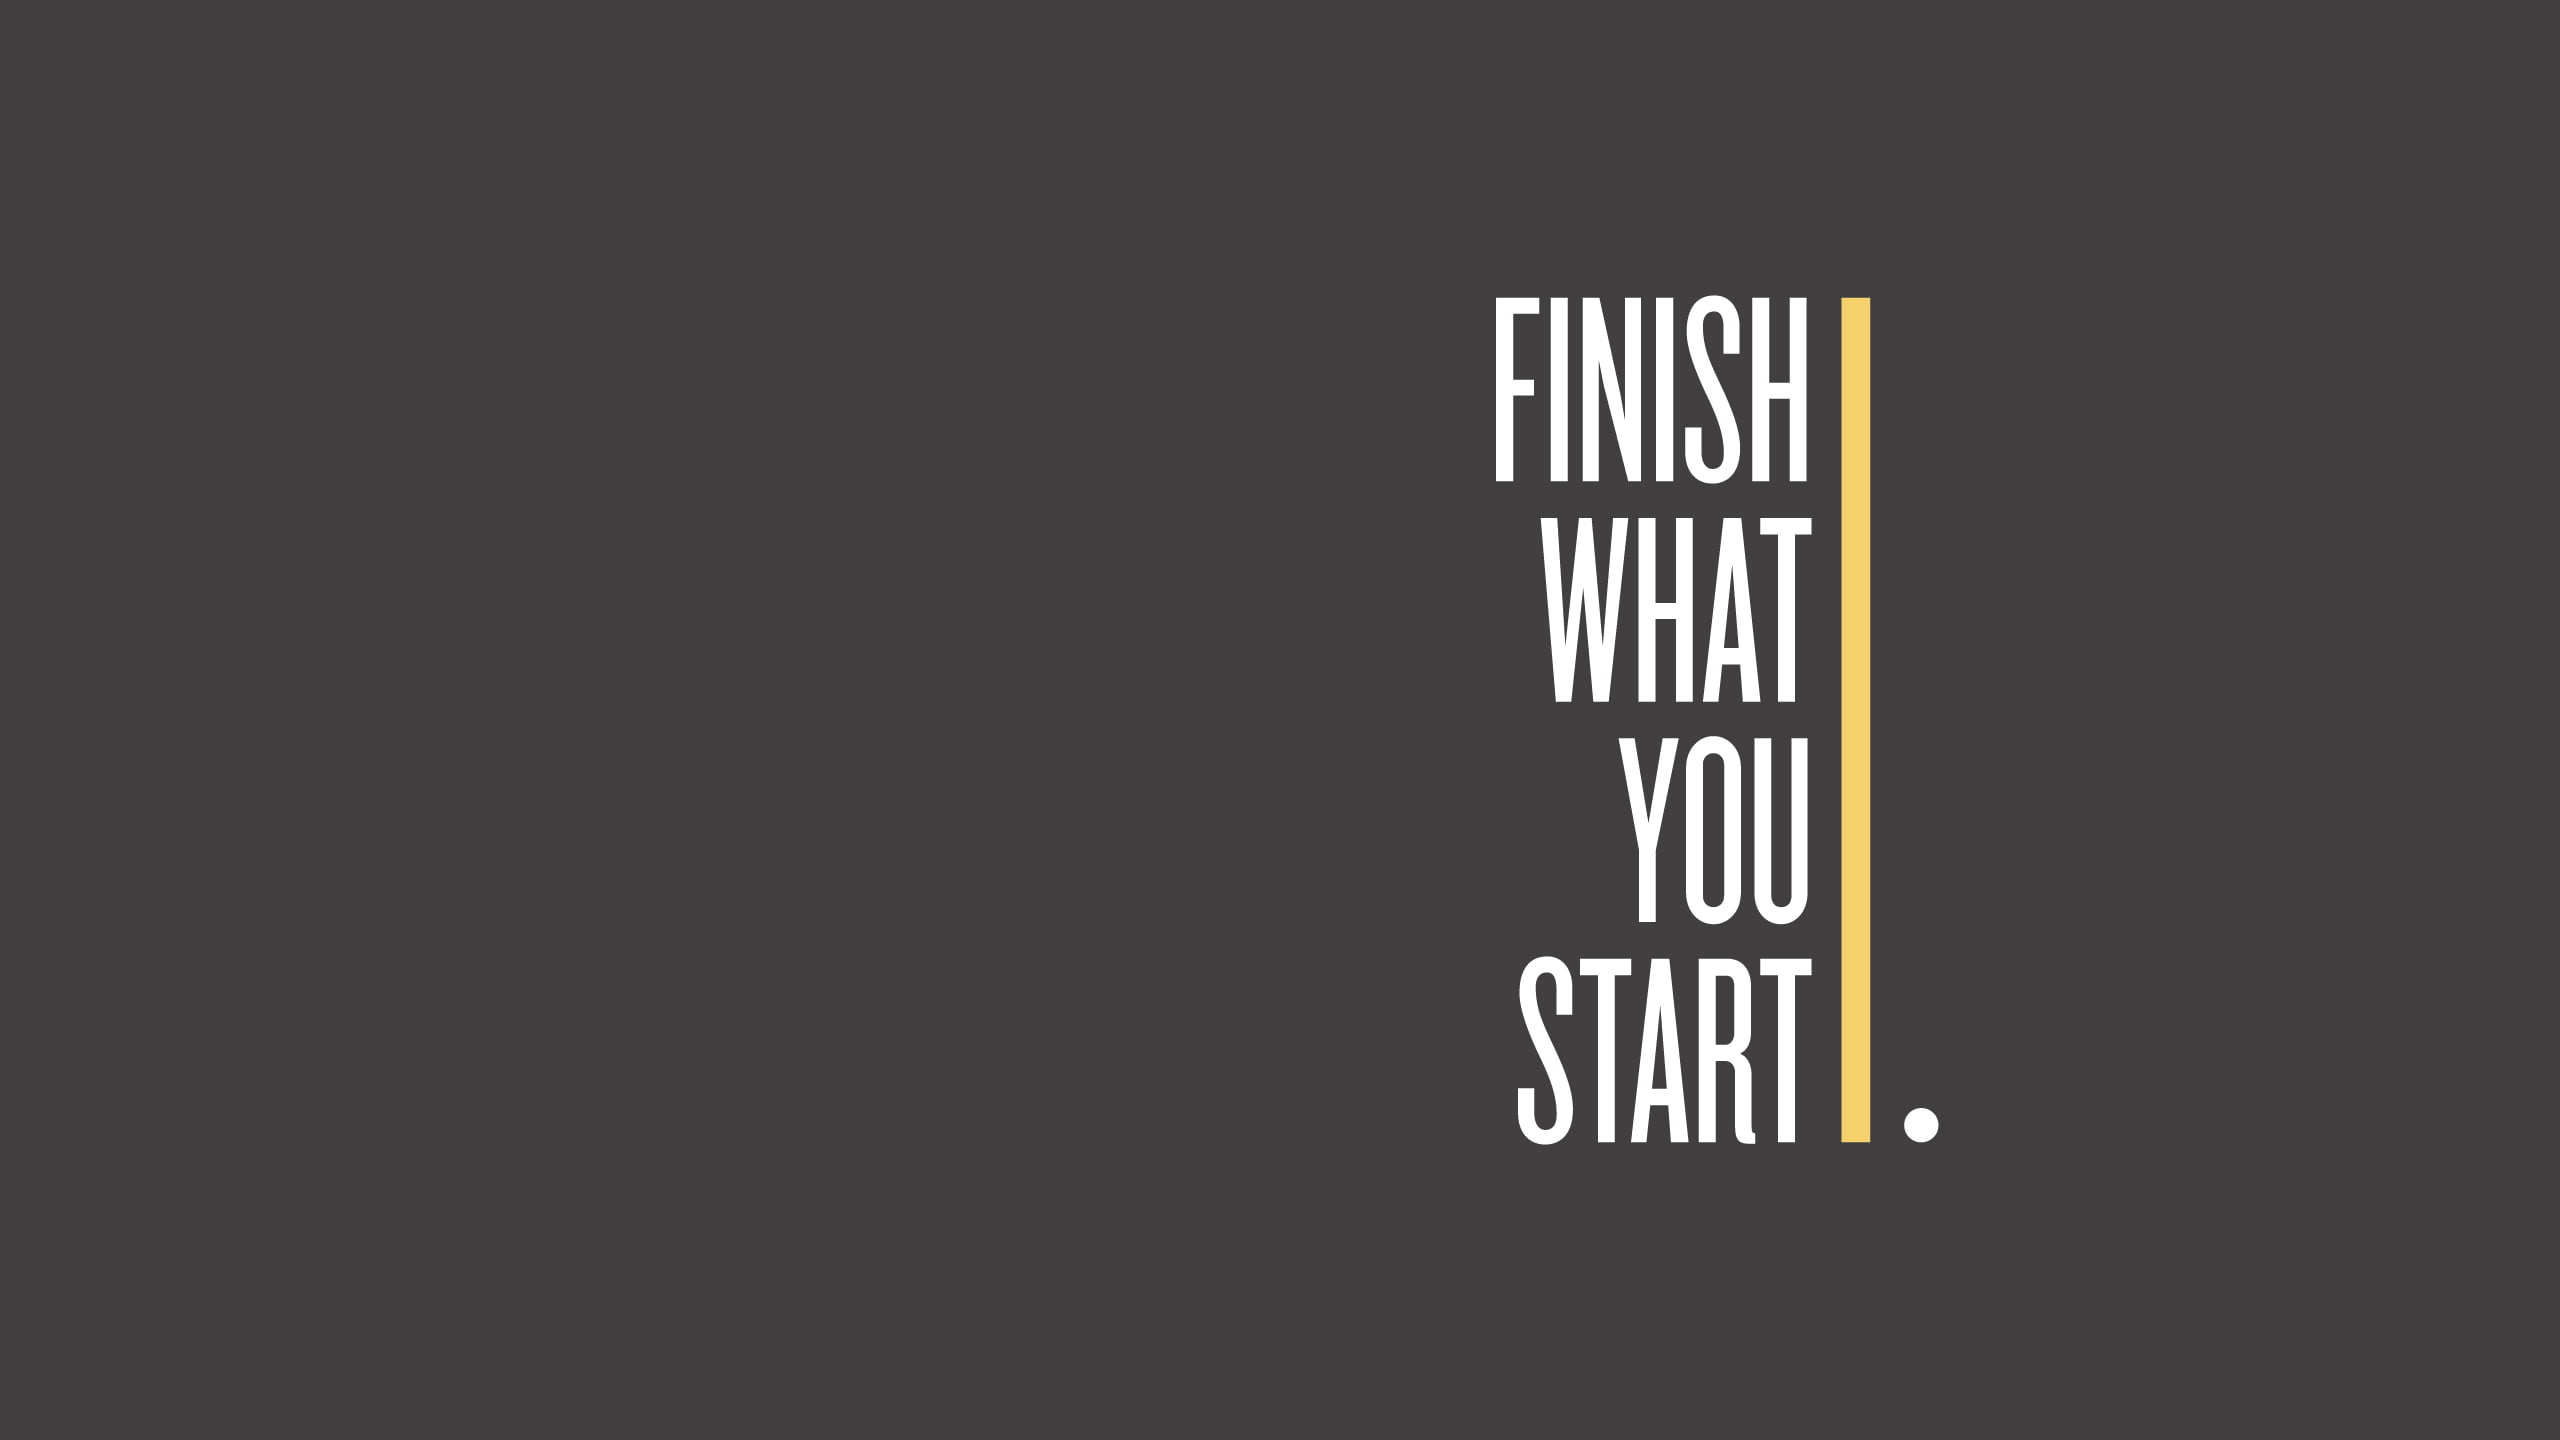 Wallpaper black background with finish what you start text overlay, typography